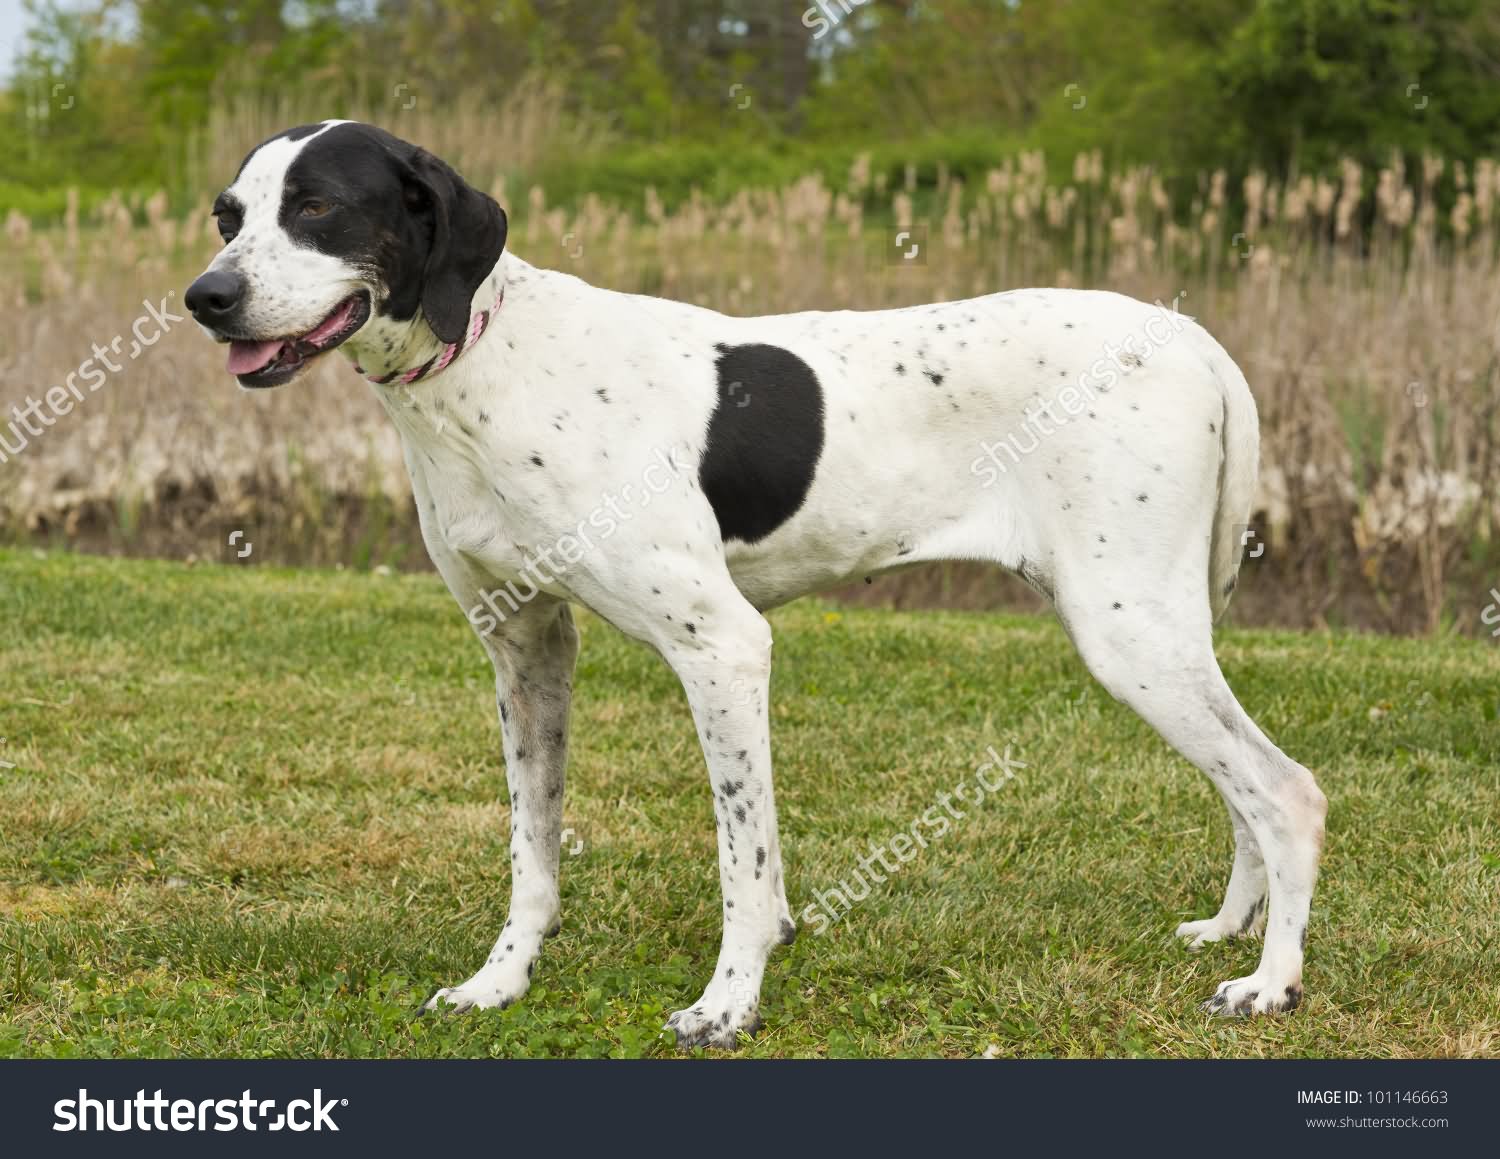 Black And White Pointer Dog Standing On Grass